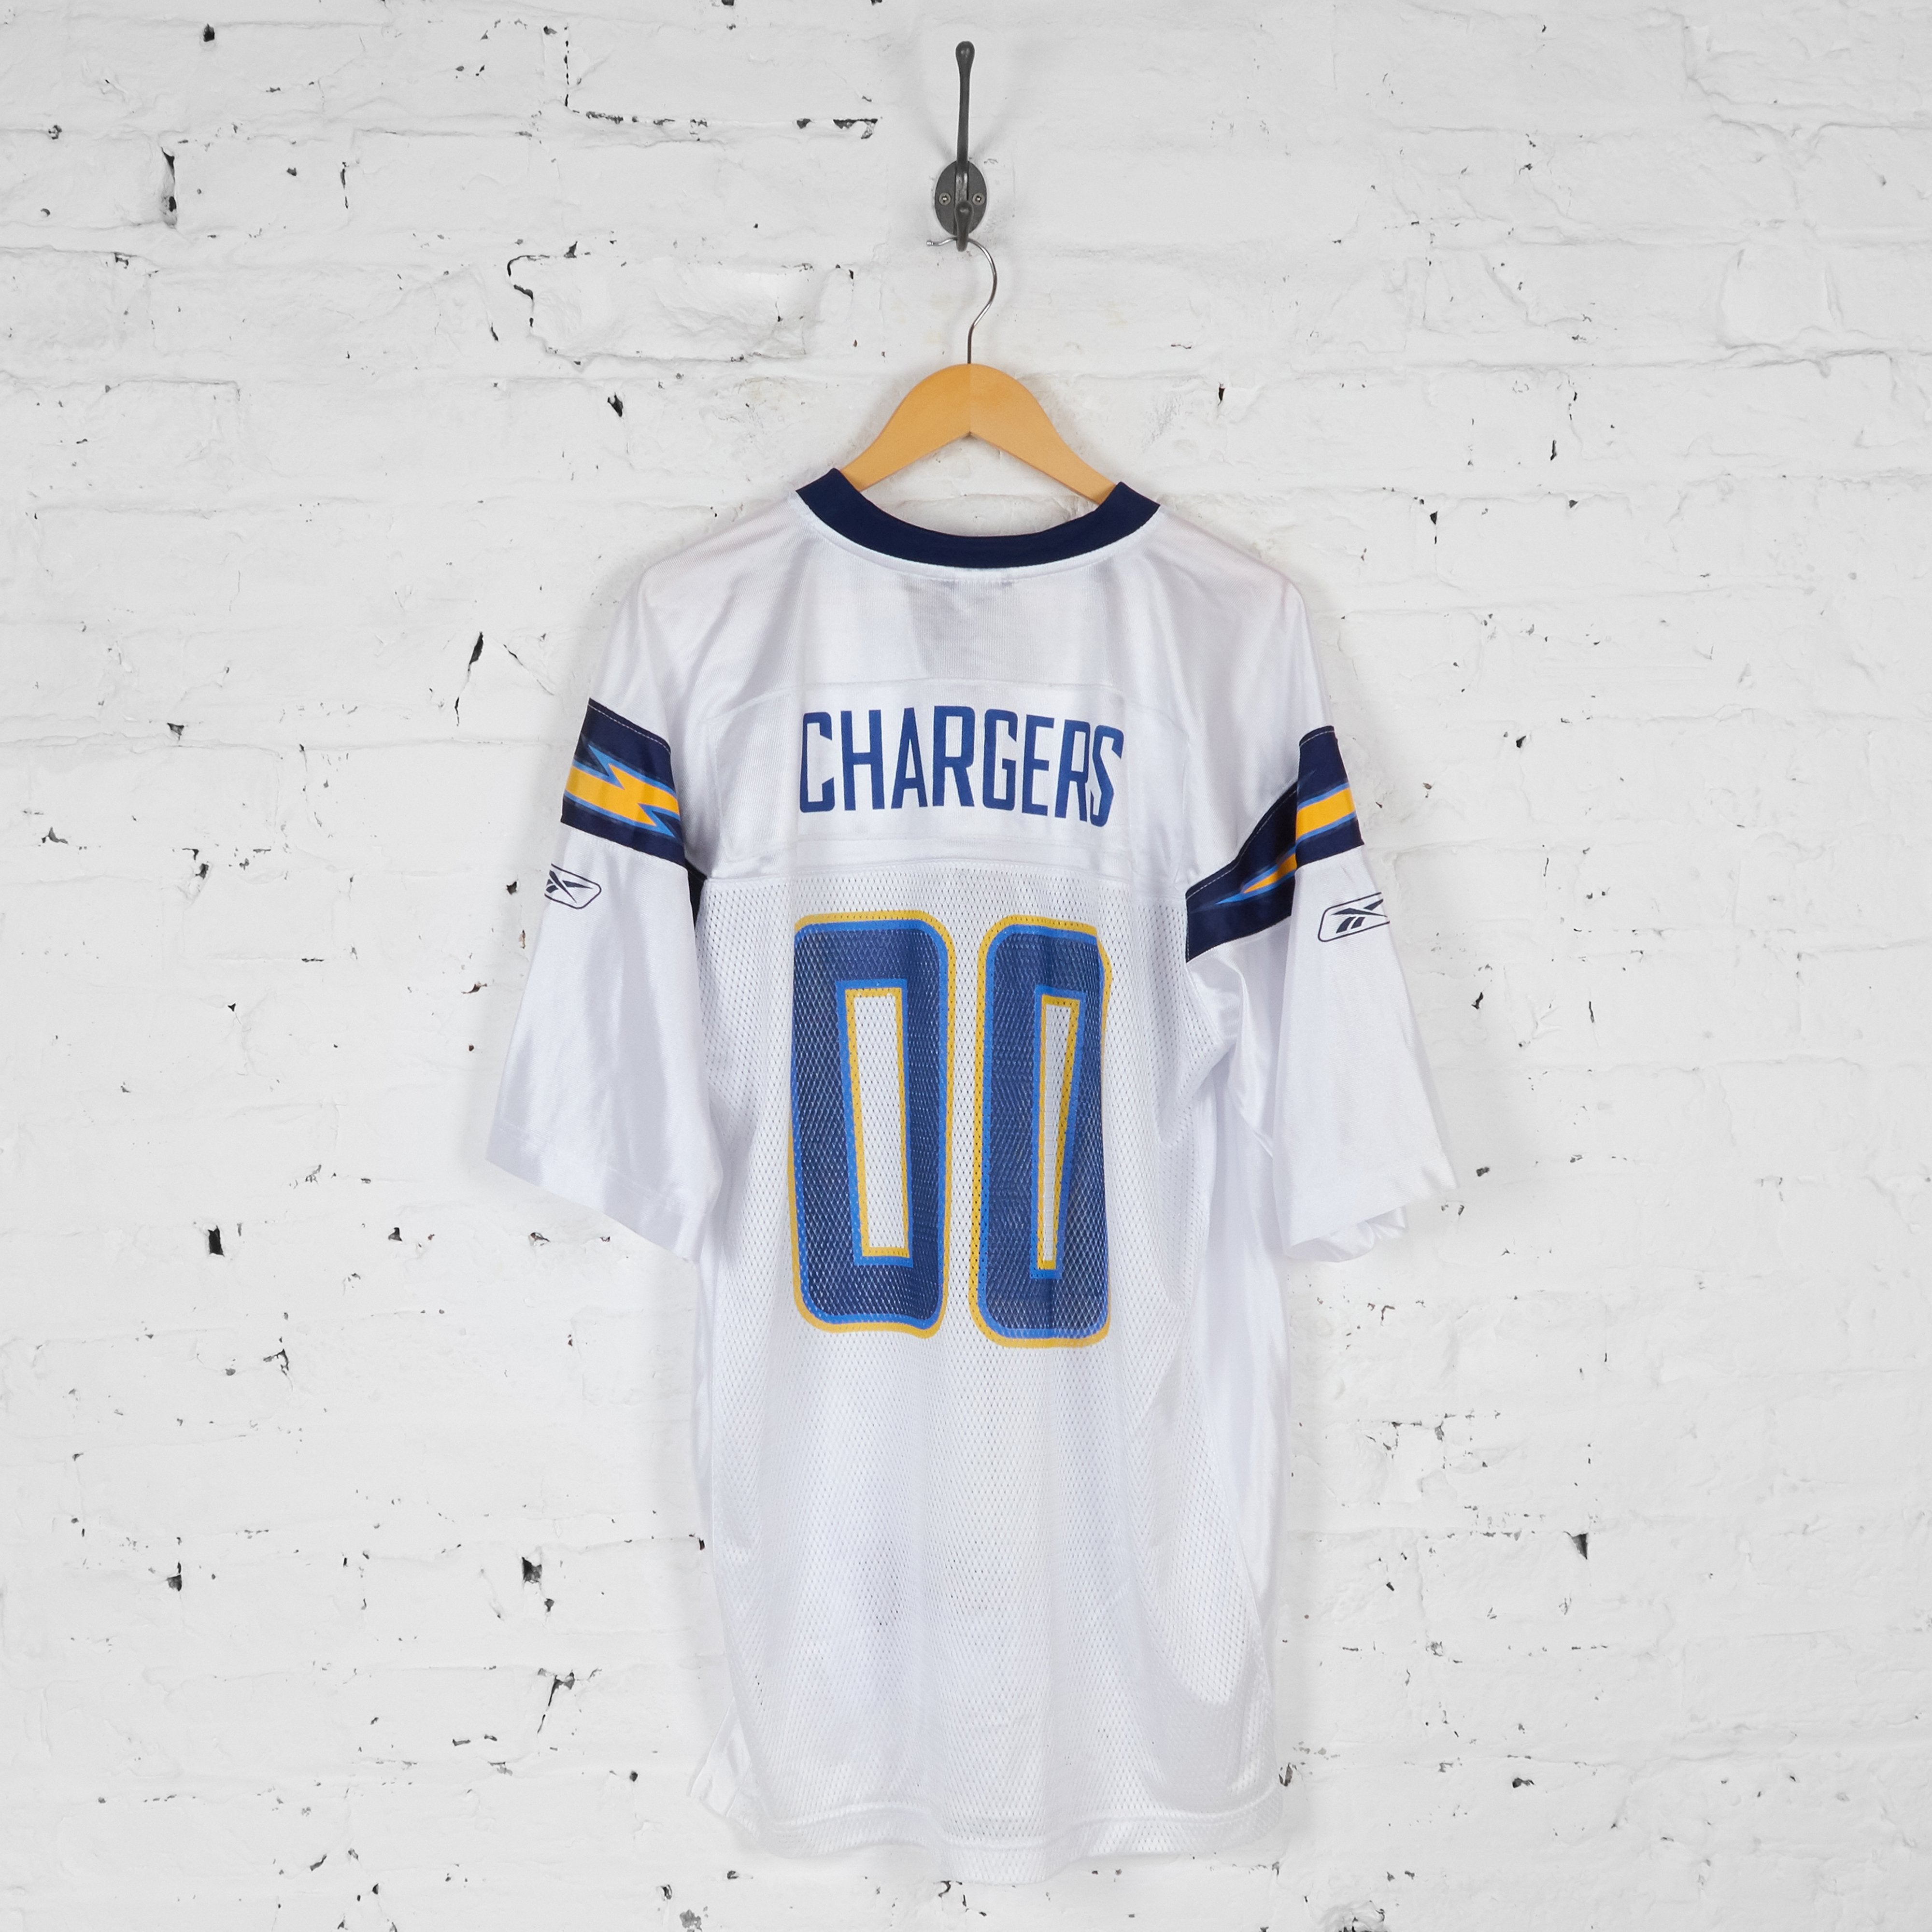 San Diego Chargers NFL American Football Jersey - White - L – Headlock